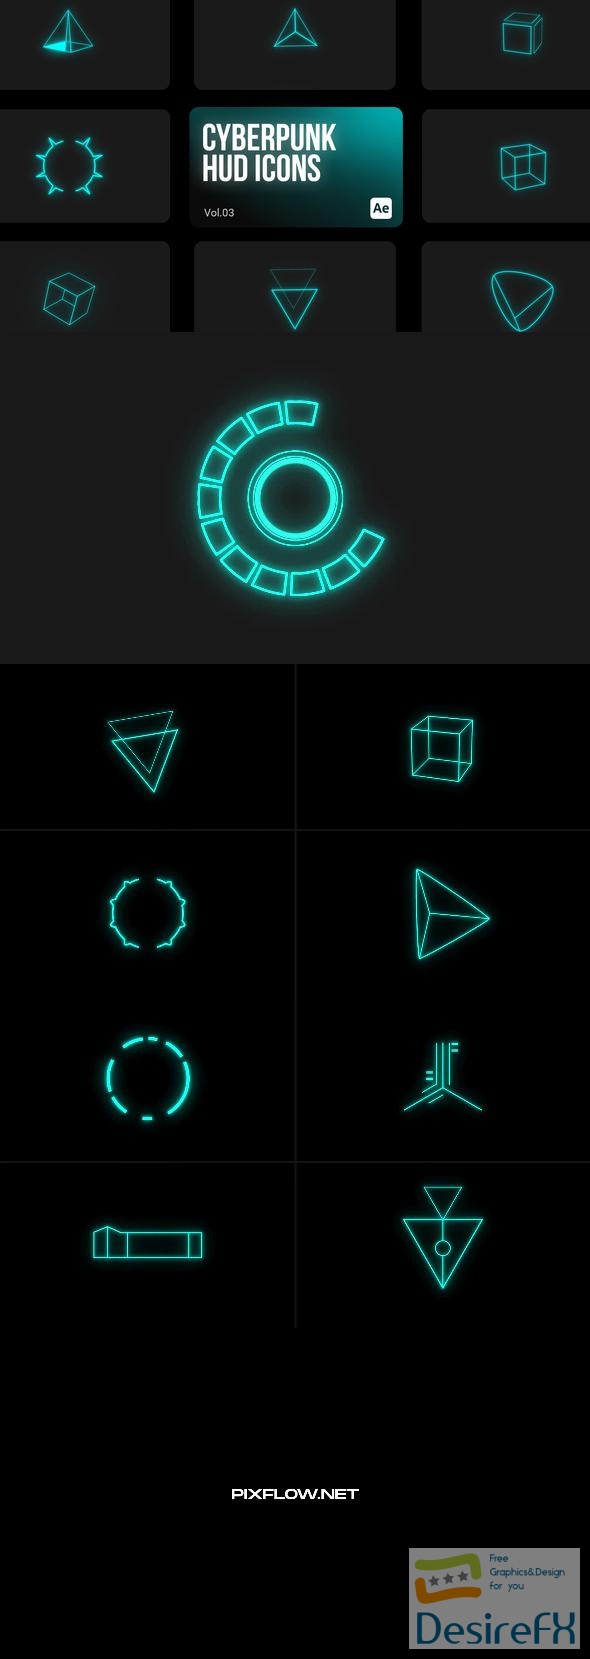 VideoHive Cyberpunk HUD Icons 03 for After Effects 44063365